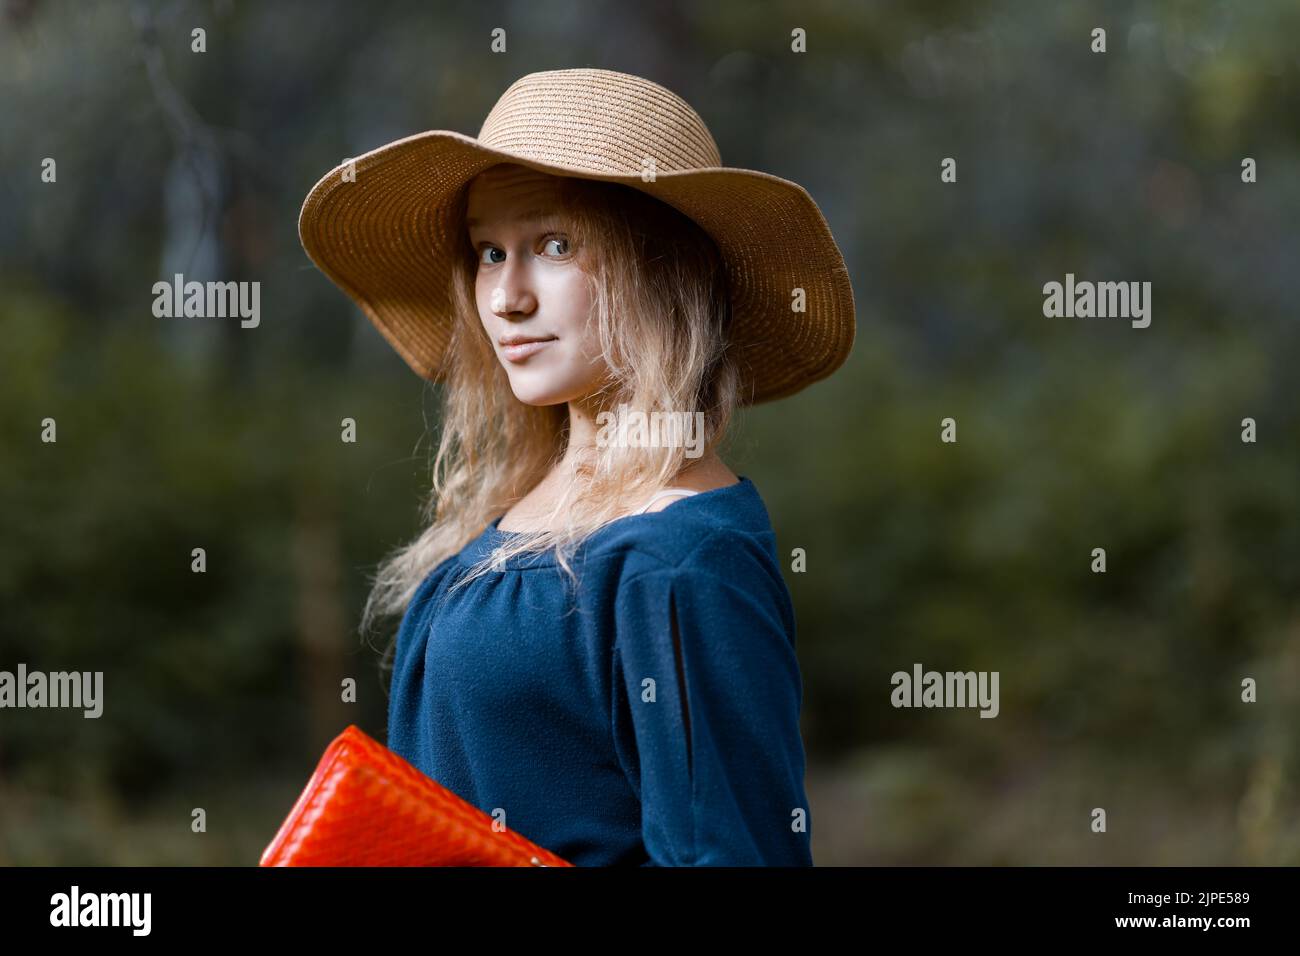 Closeup portrait of a young longhair girl in a straw hat and with a red bag in her hand against blurred nature background. Copyspace. Stock Photo